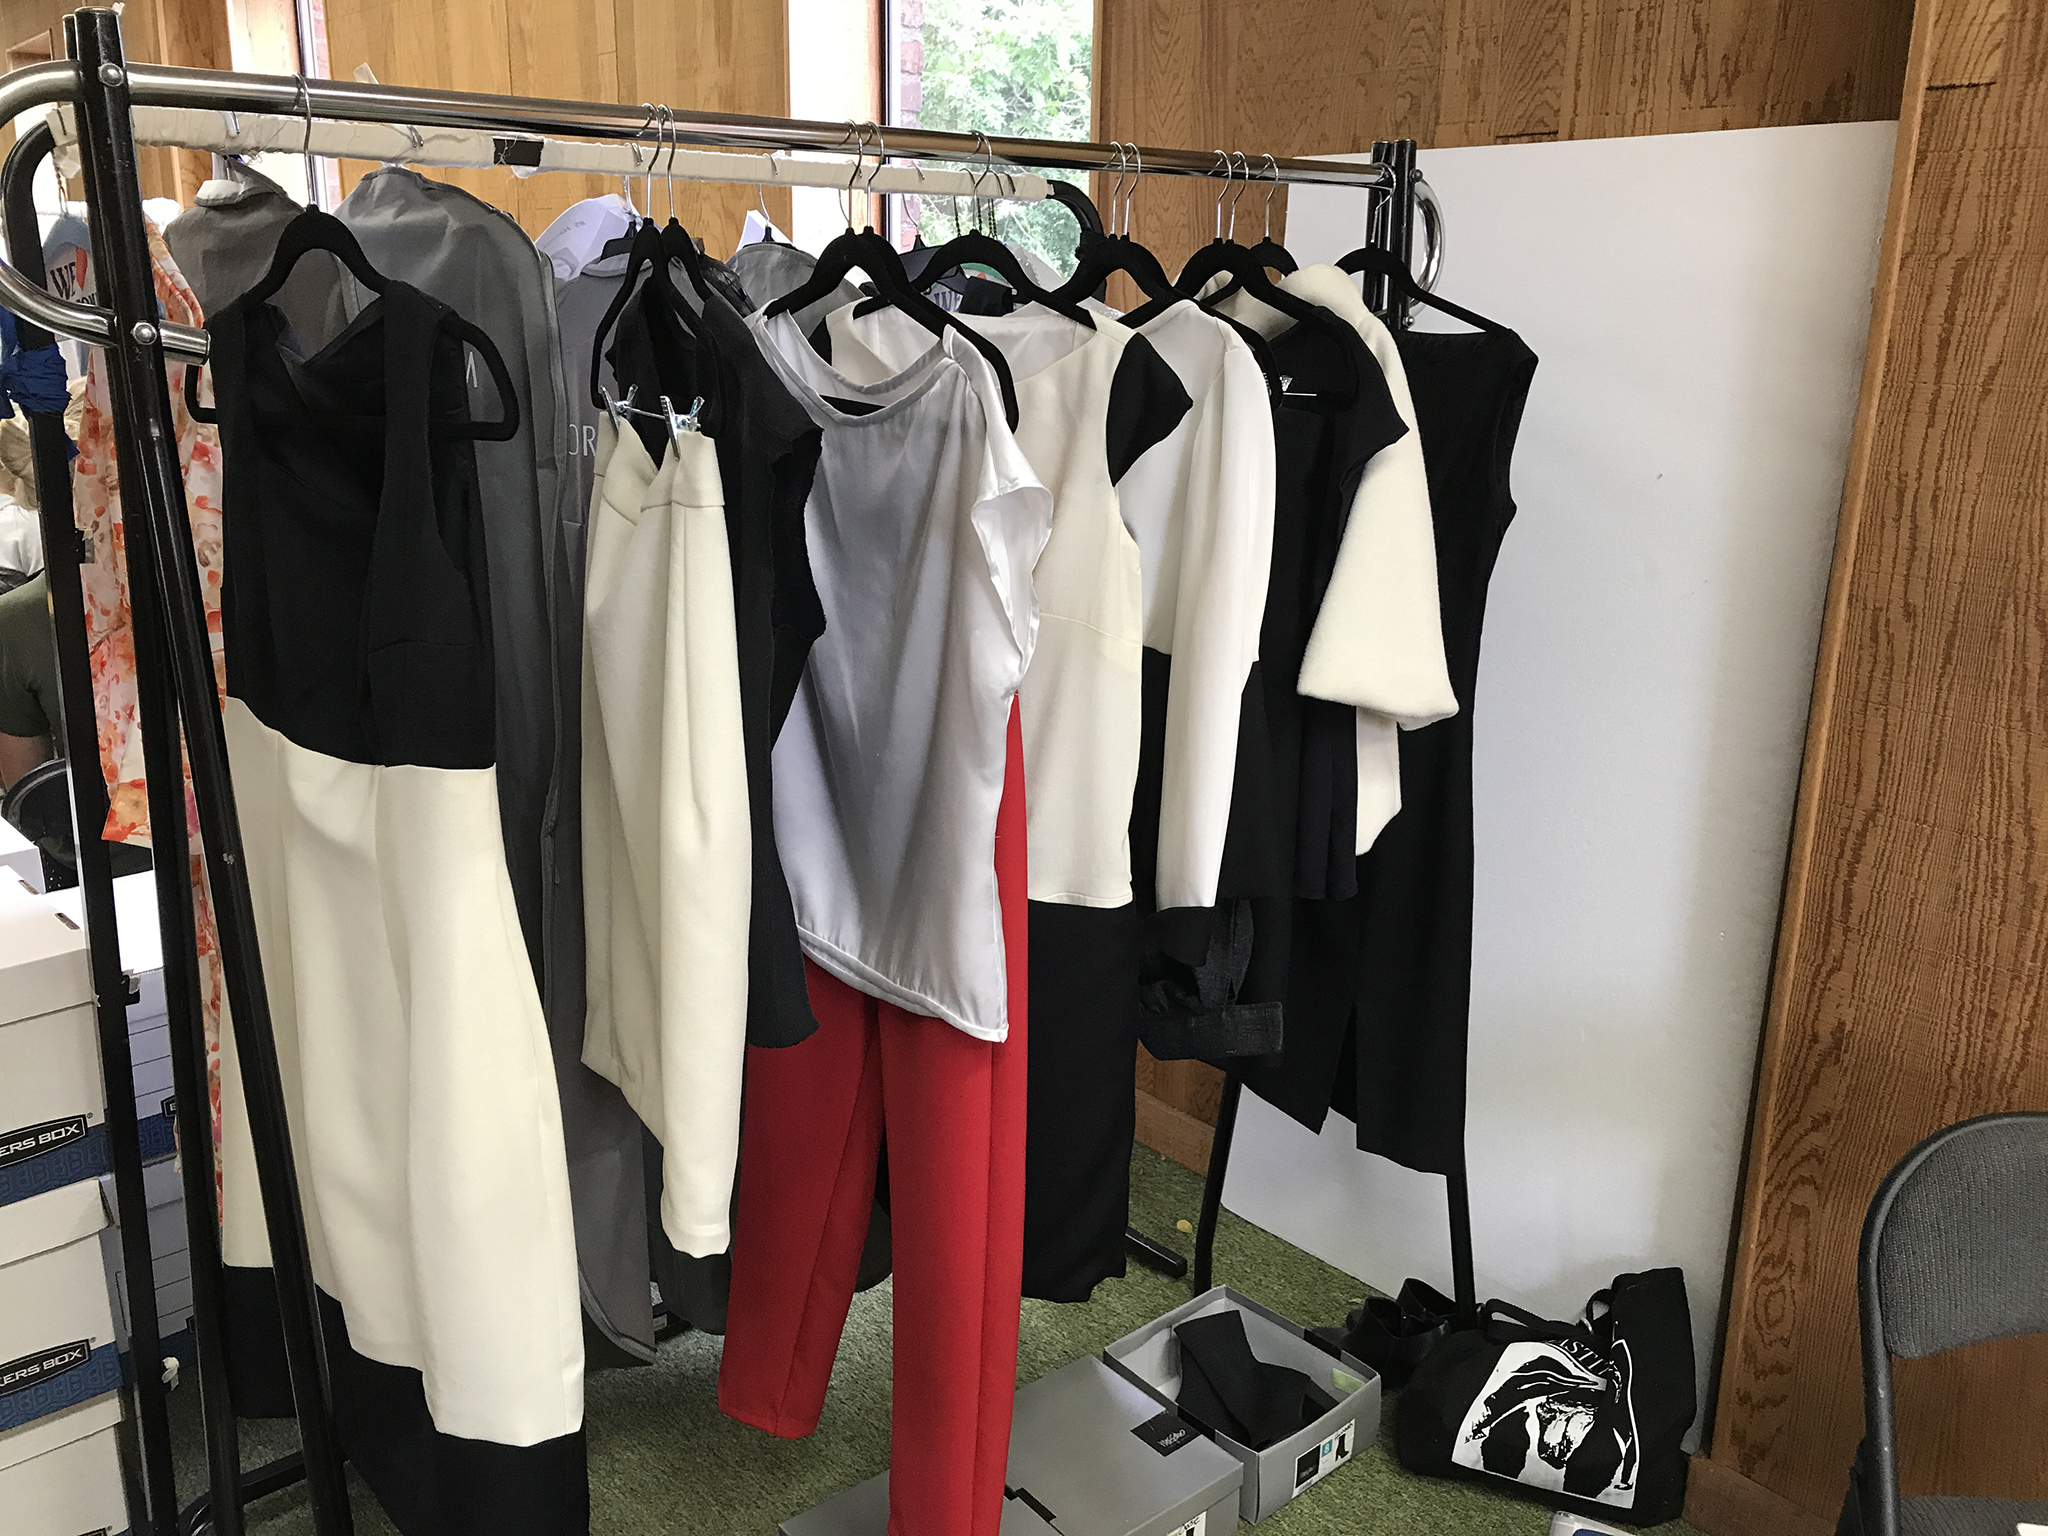 Behind The Scenes: Clothing wrack with fashiong line.